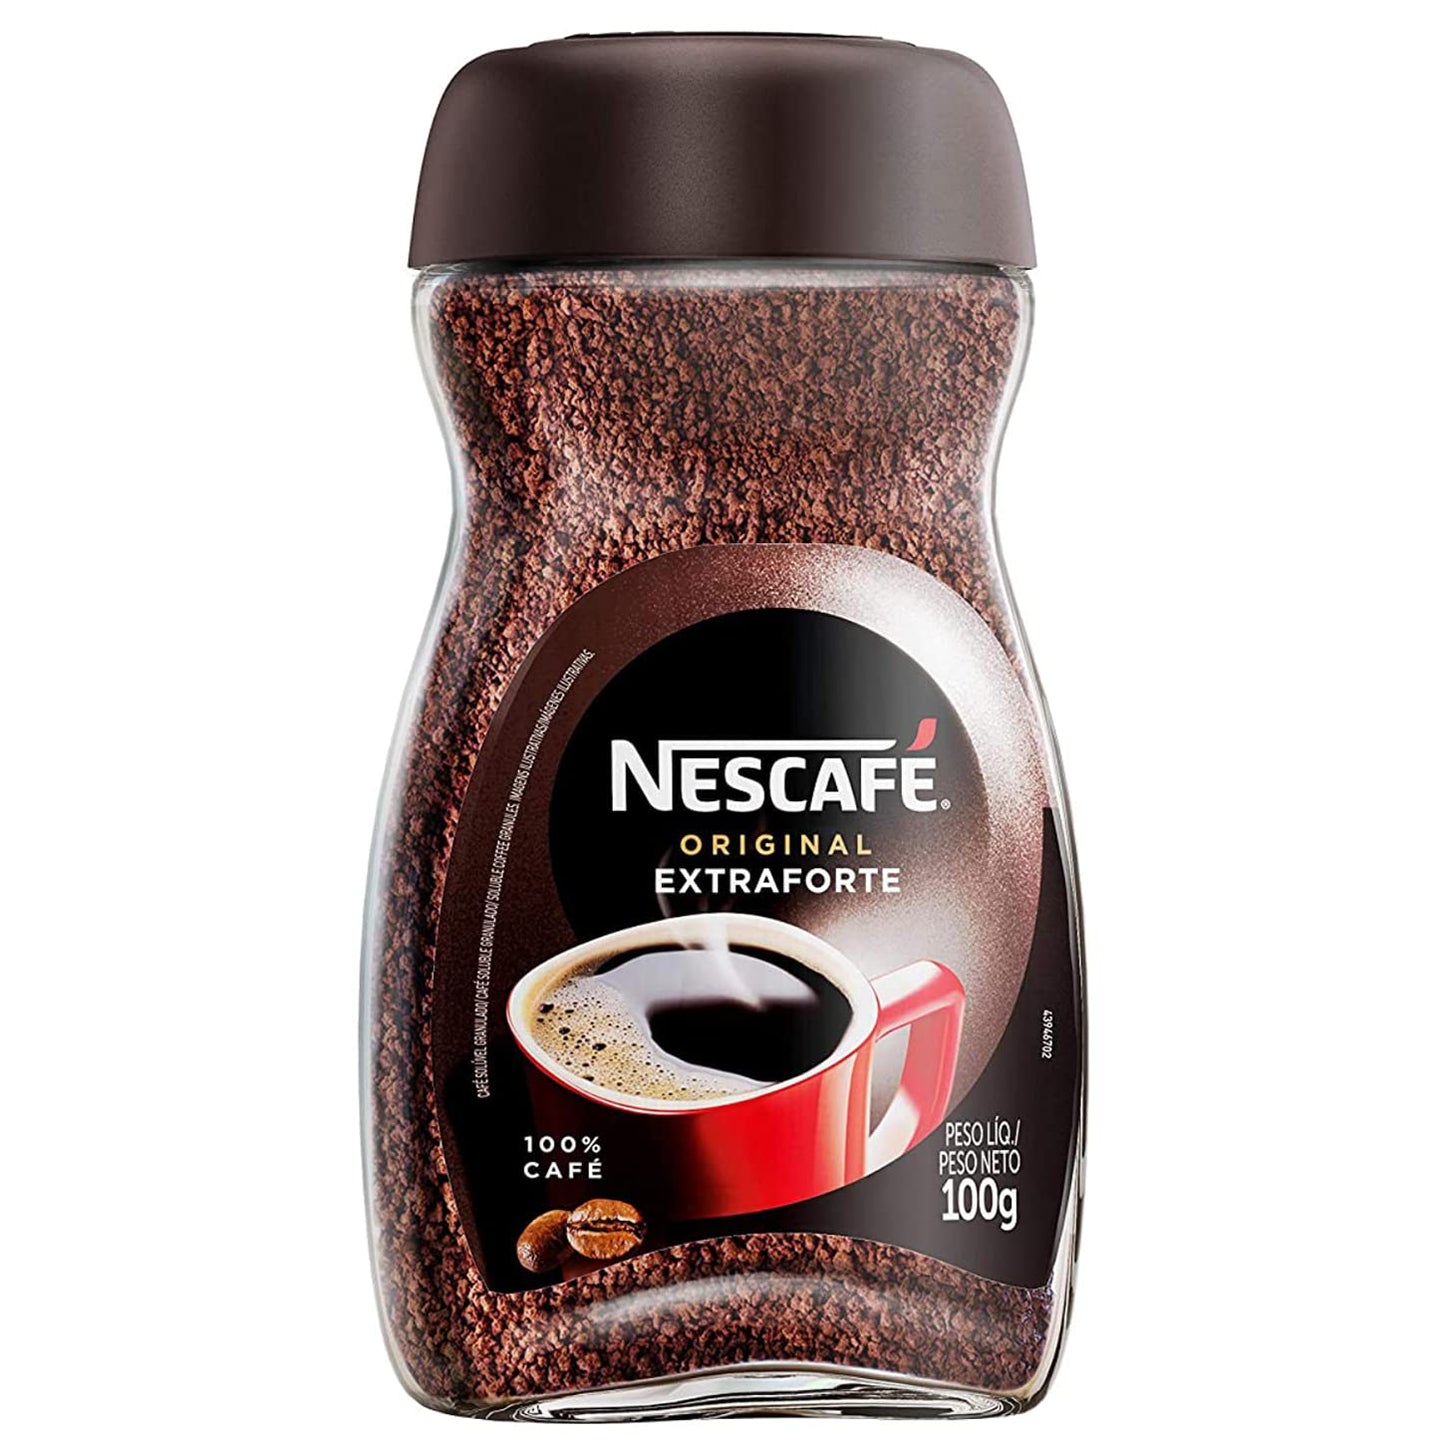 Nescafe Original Extra Forte Ground Coffee is the extra strong instant coffee,